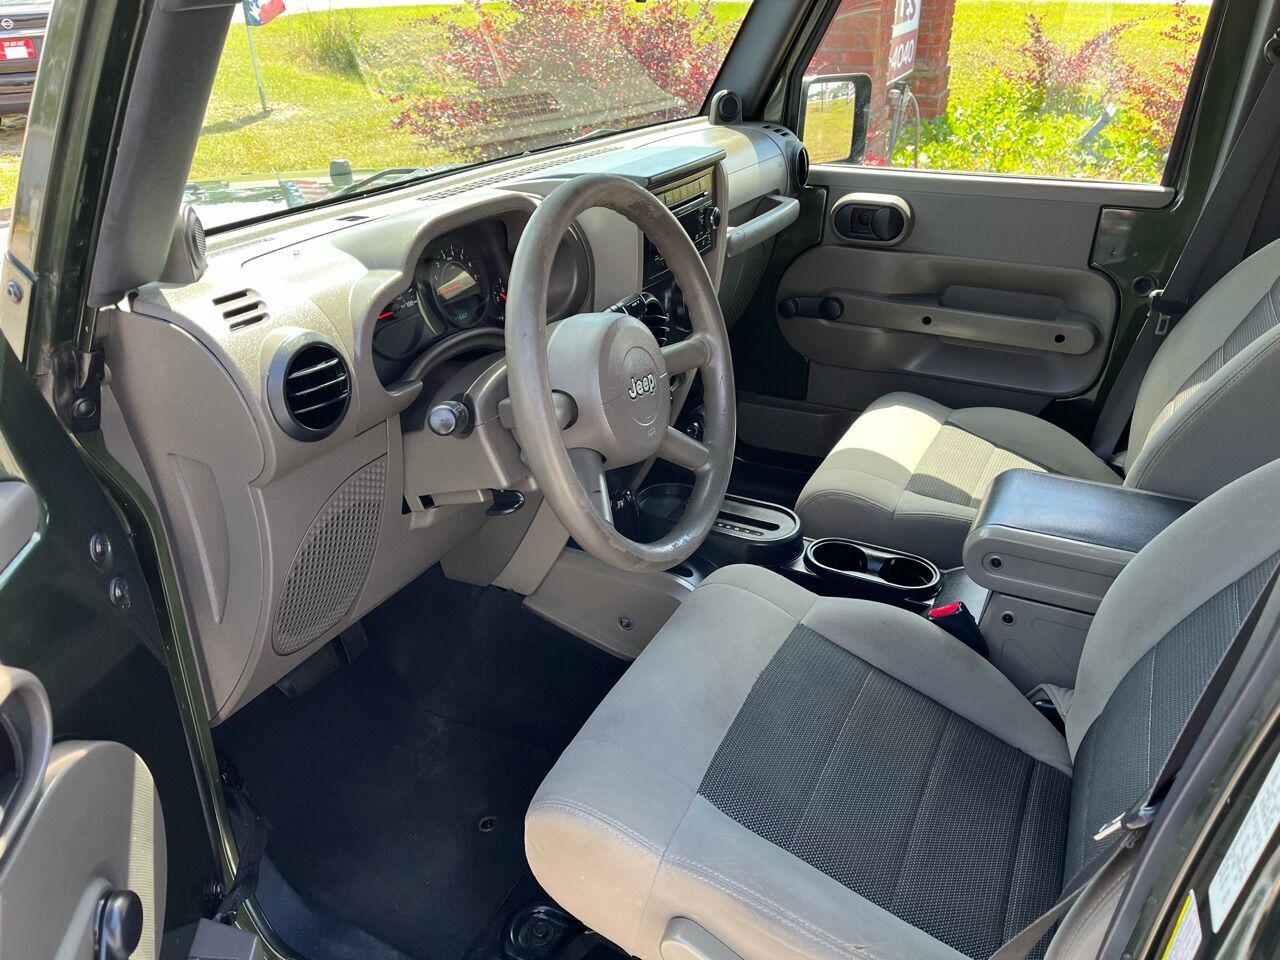 2008 Jeep Wrangler Unlimited For Sale In Georgia ®